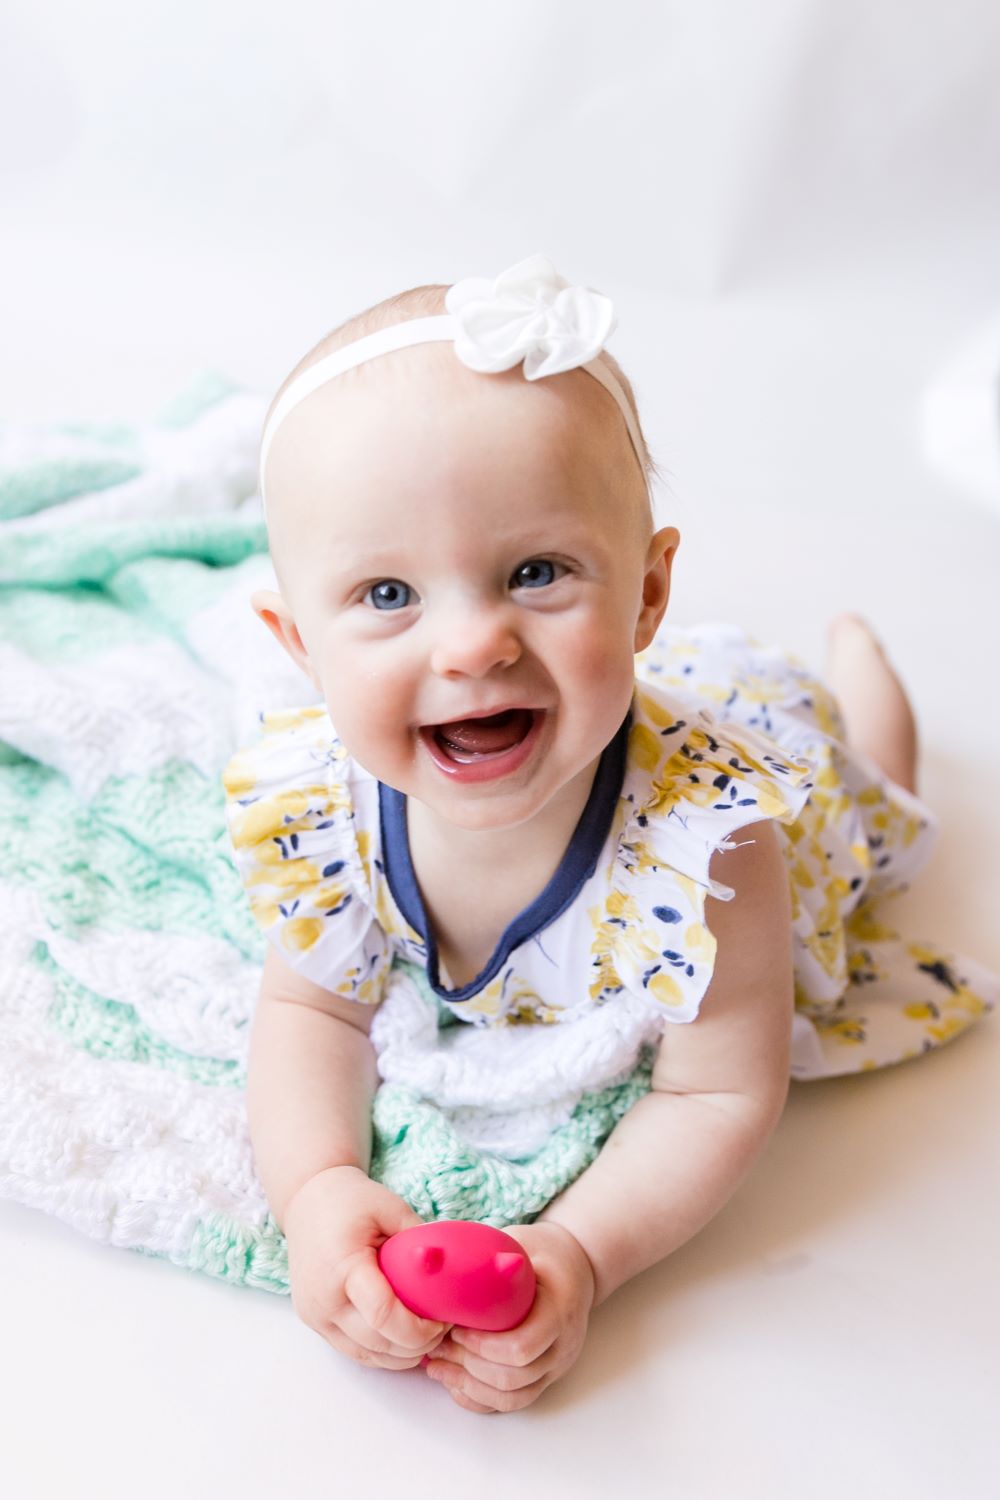 9-Month Photos to Take of Your Baby